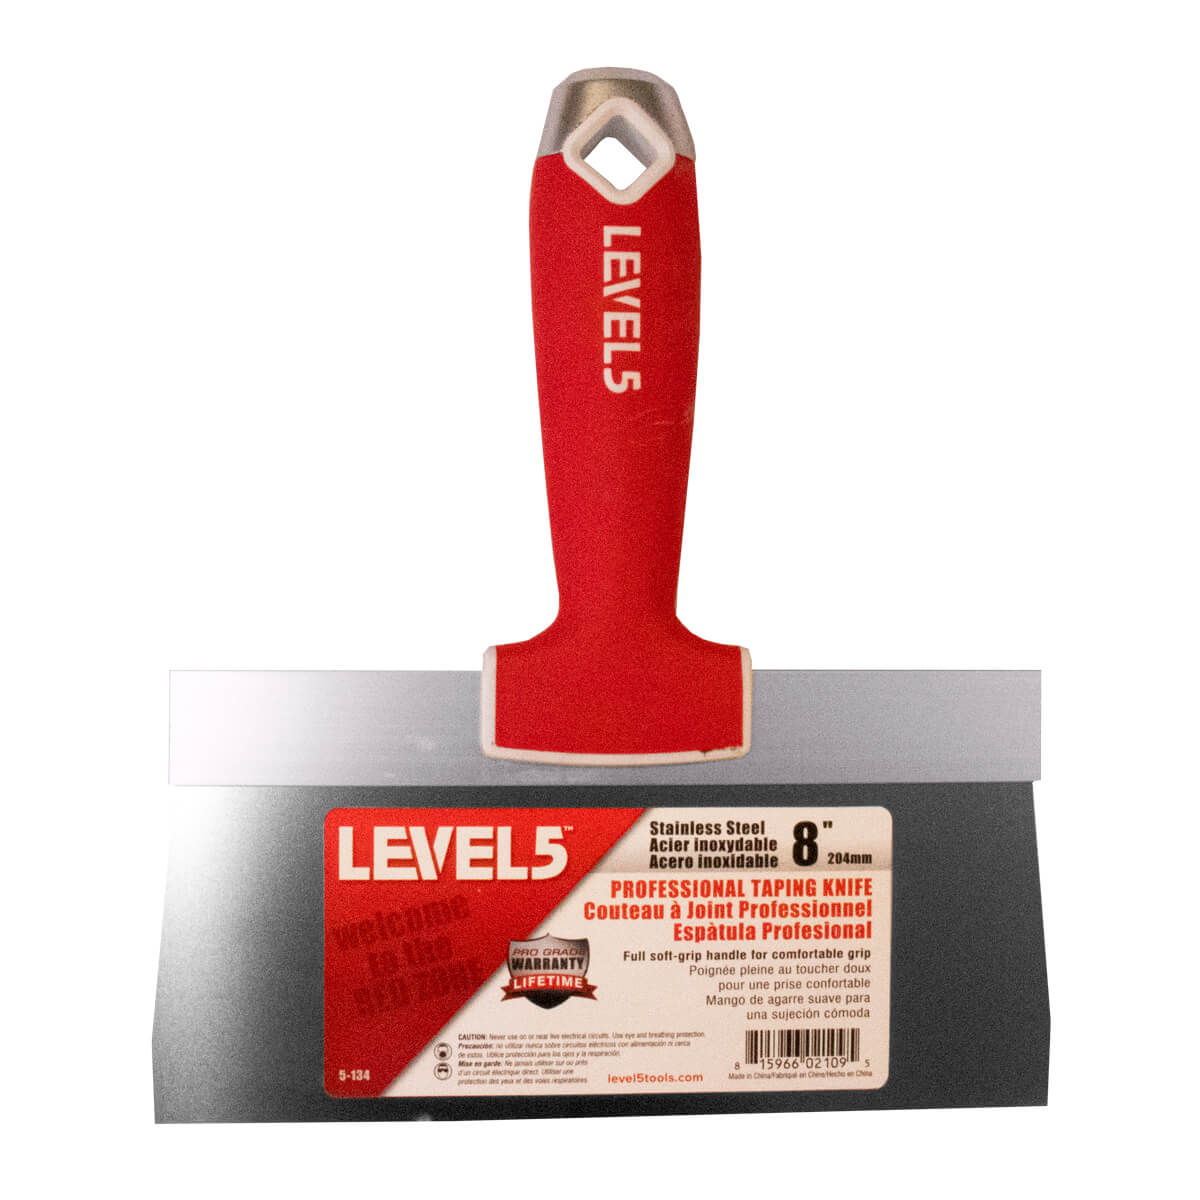 Taping Knife Stainless 8" 200mm Level5 Tools